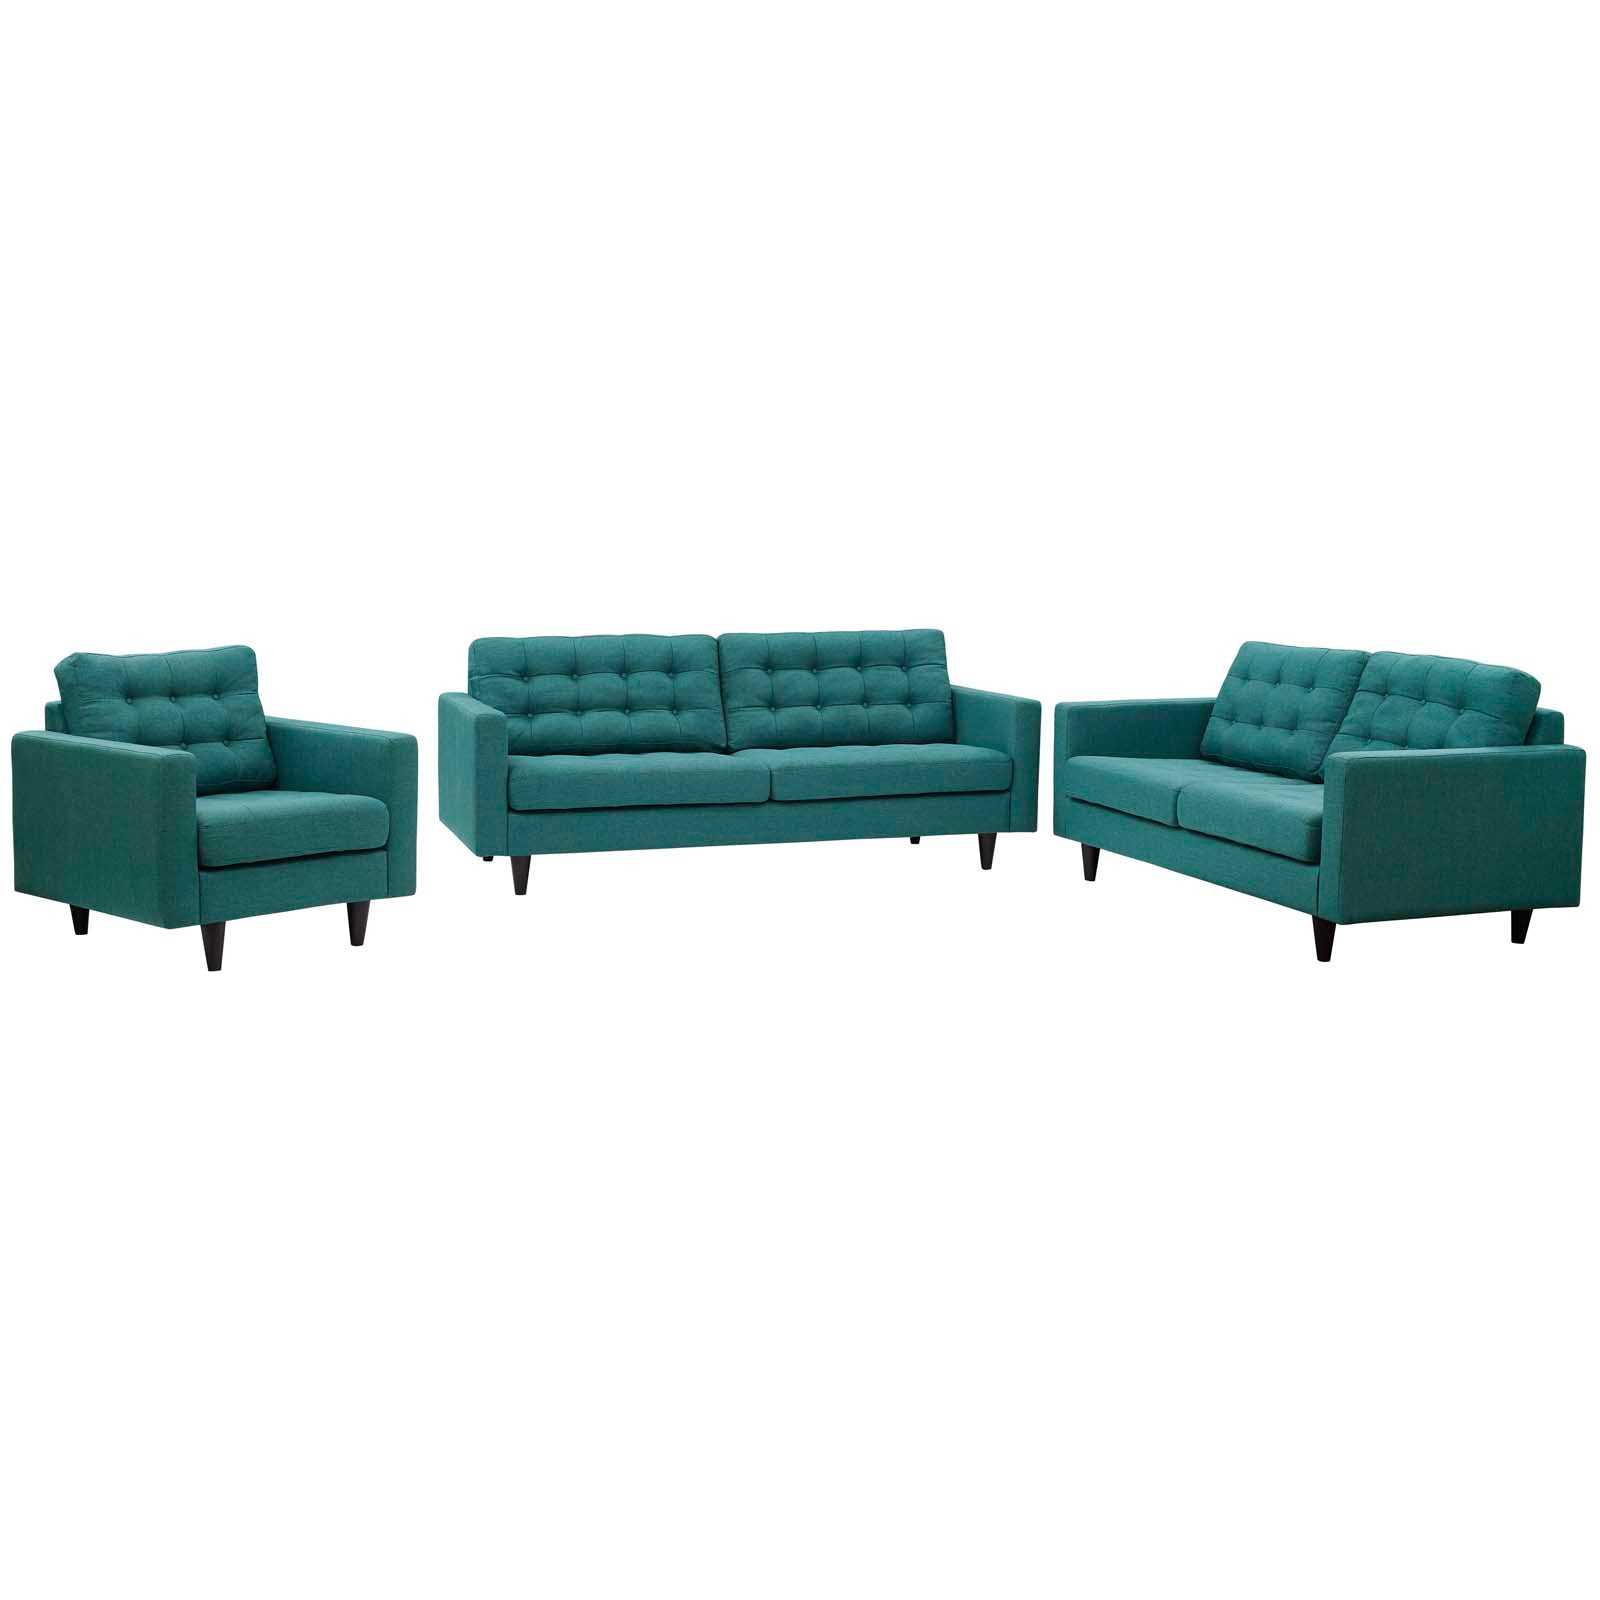 Modway Living Room Sets - Empress Sofa, Loveseat And Armchair Set Of 3 Teal